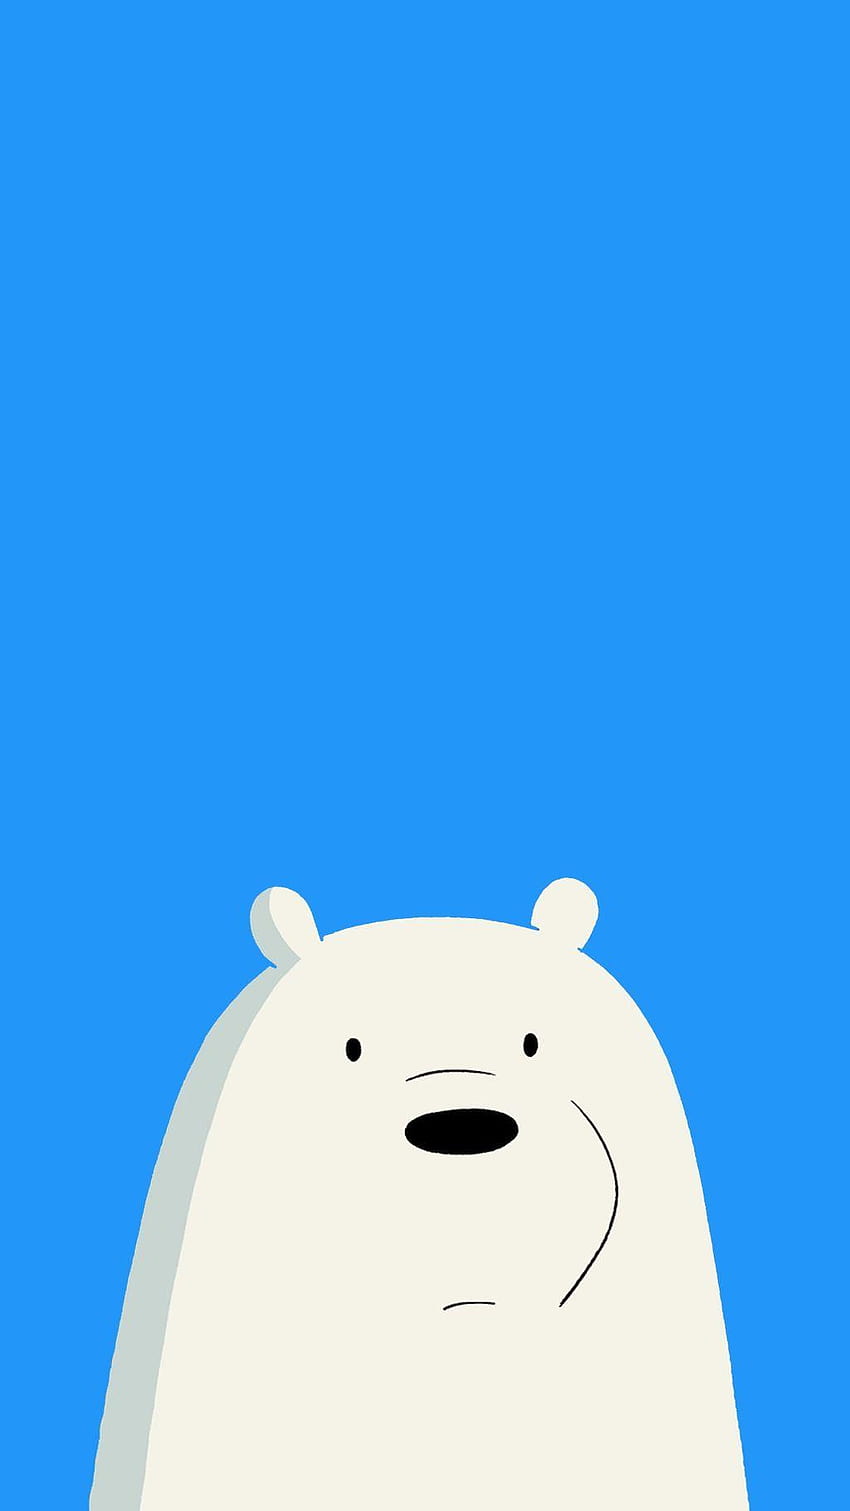 Are you trying to find Ice Bear We Bare Bears, we bare bears phone HD phone wallpaper